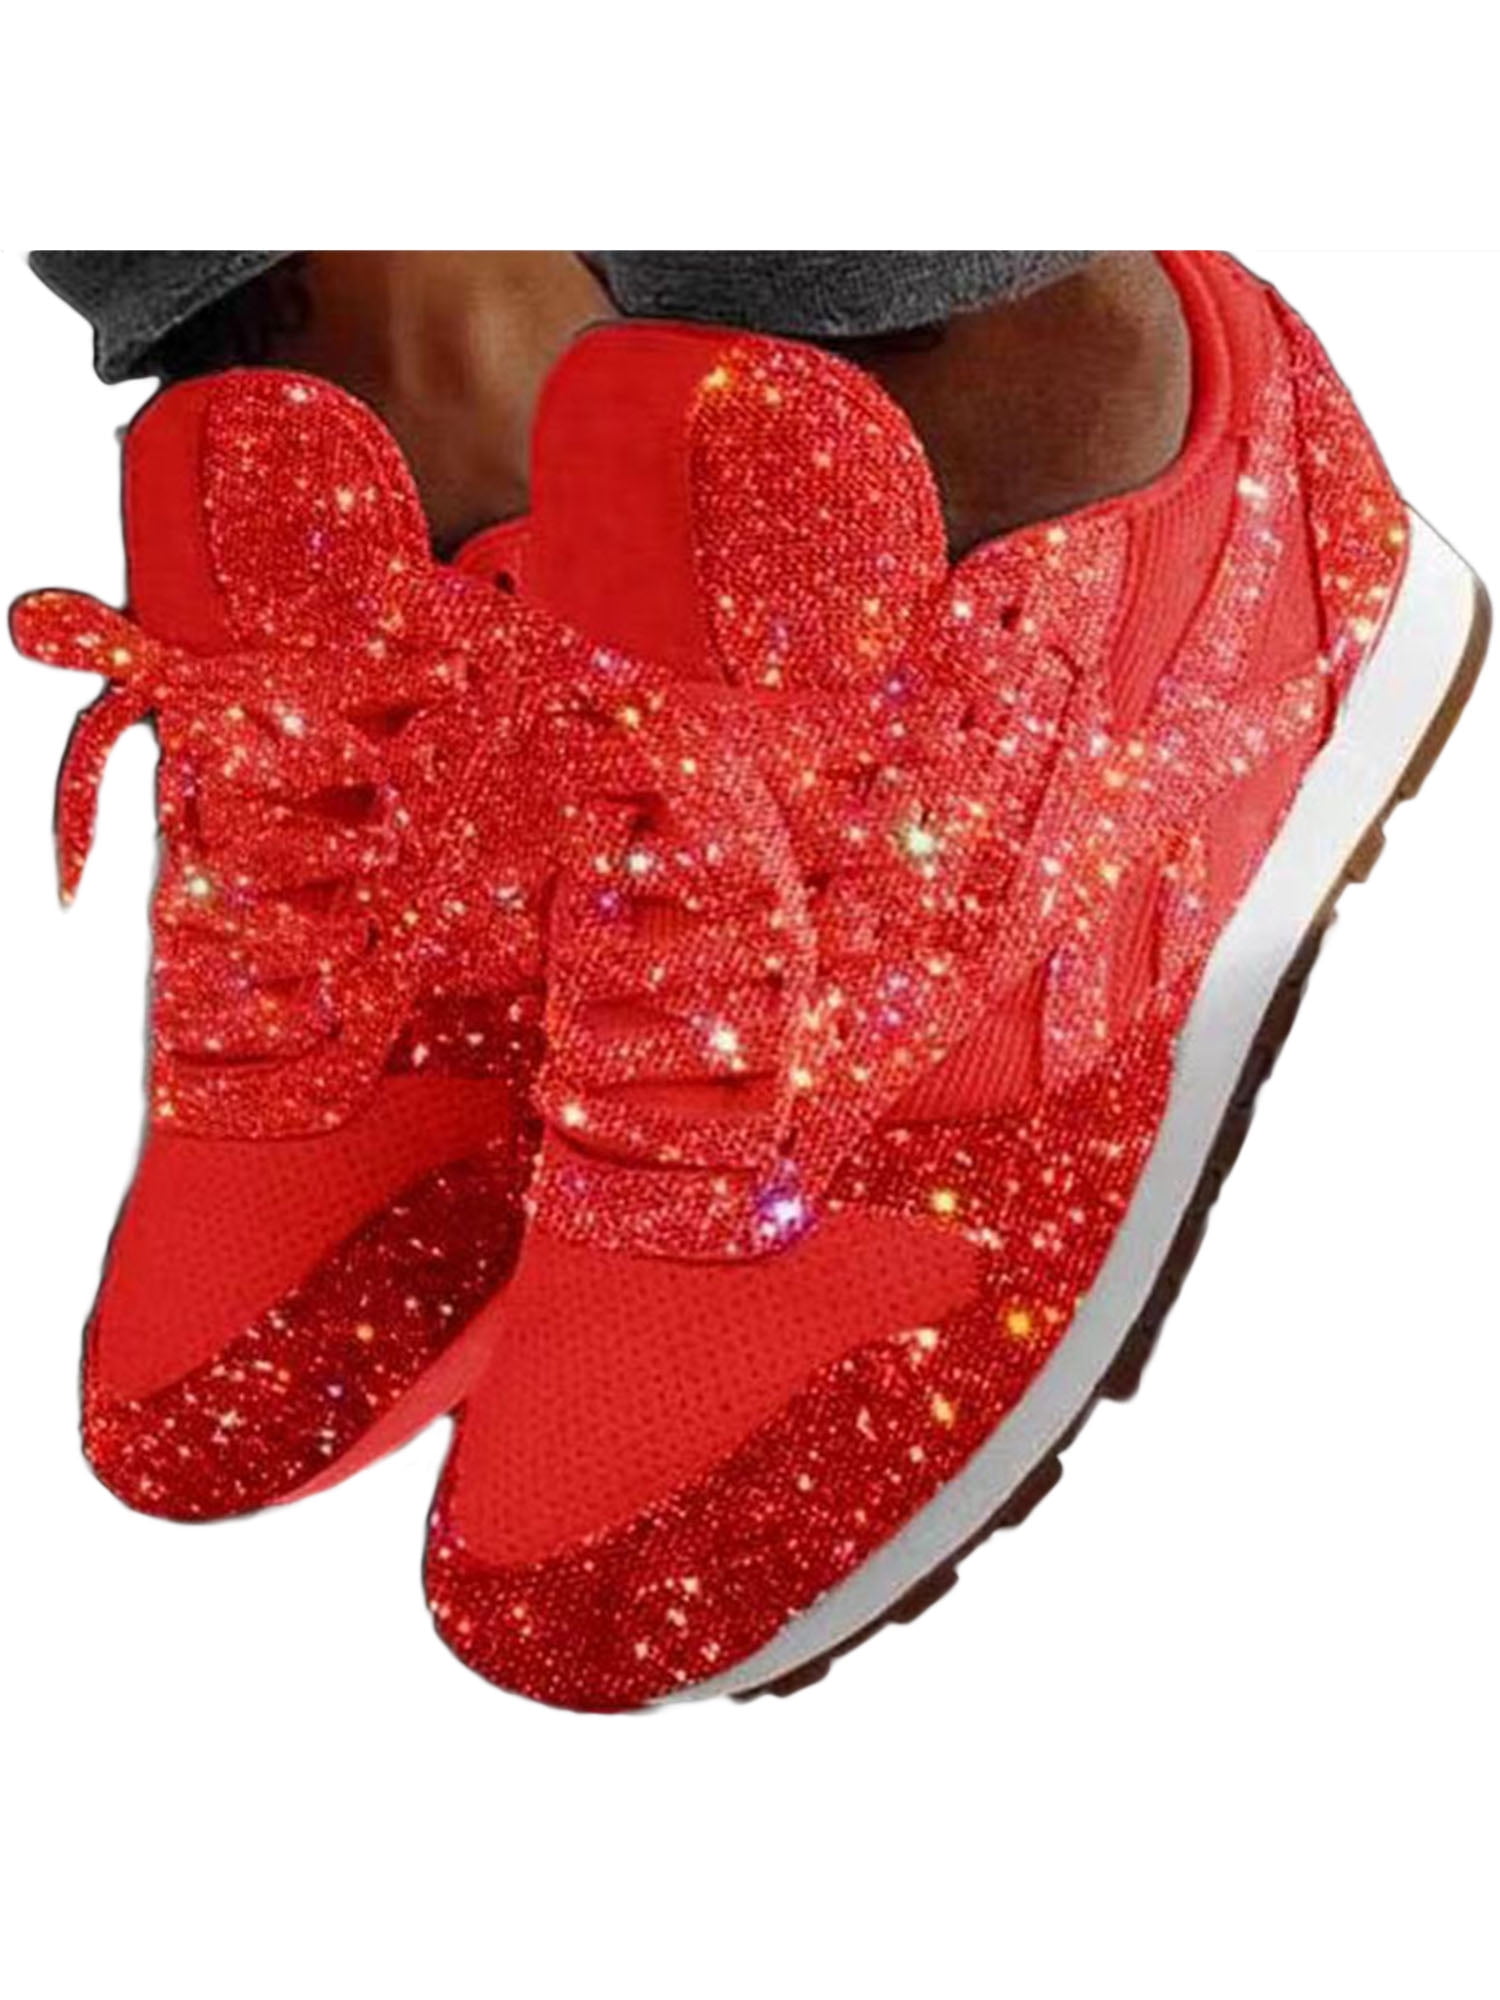 Women's Casual Breathable Crystal Bling Lace Up Sport Shoes Sneakers Glitter  Tennis Sneakers Comfy Sparkly Rhinestone Bling Running Shoes Shiny Sequin  Flat Heel Shoes 